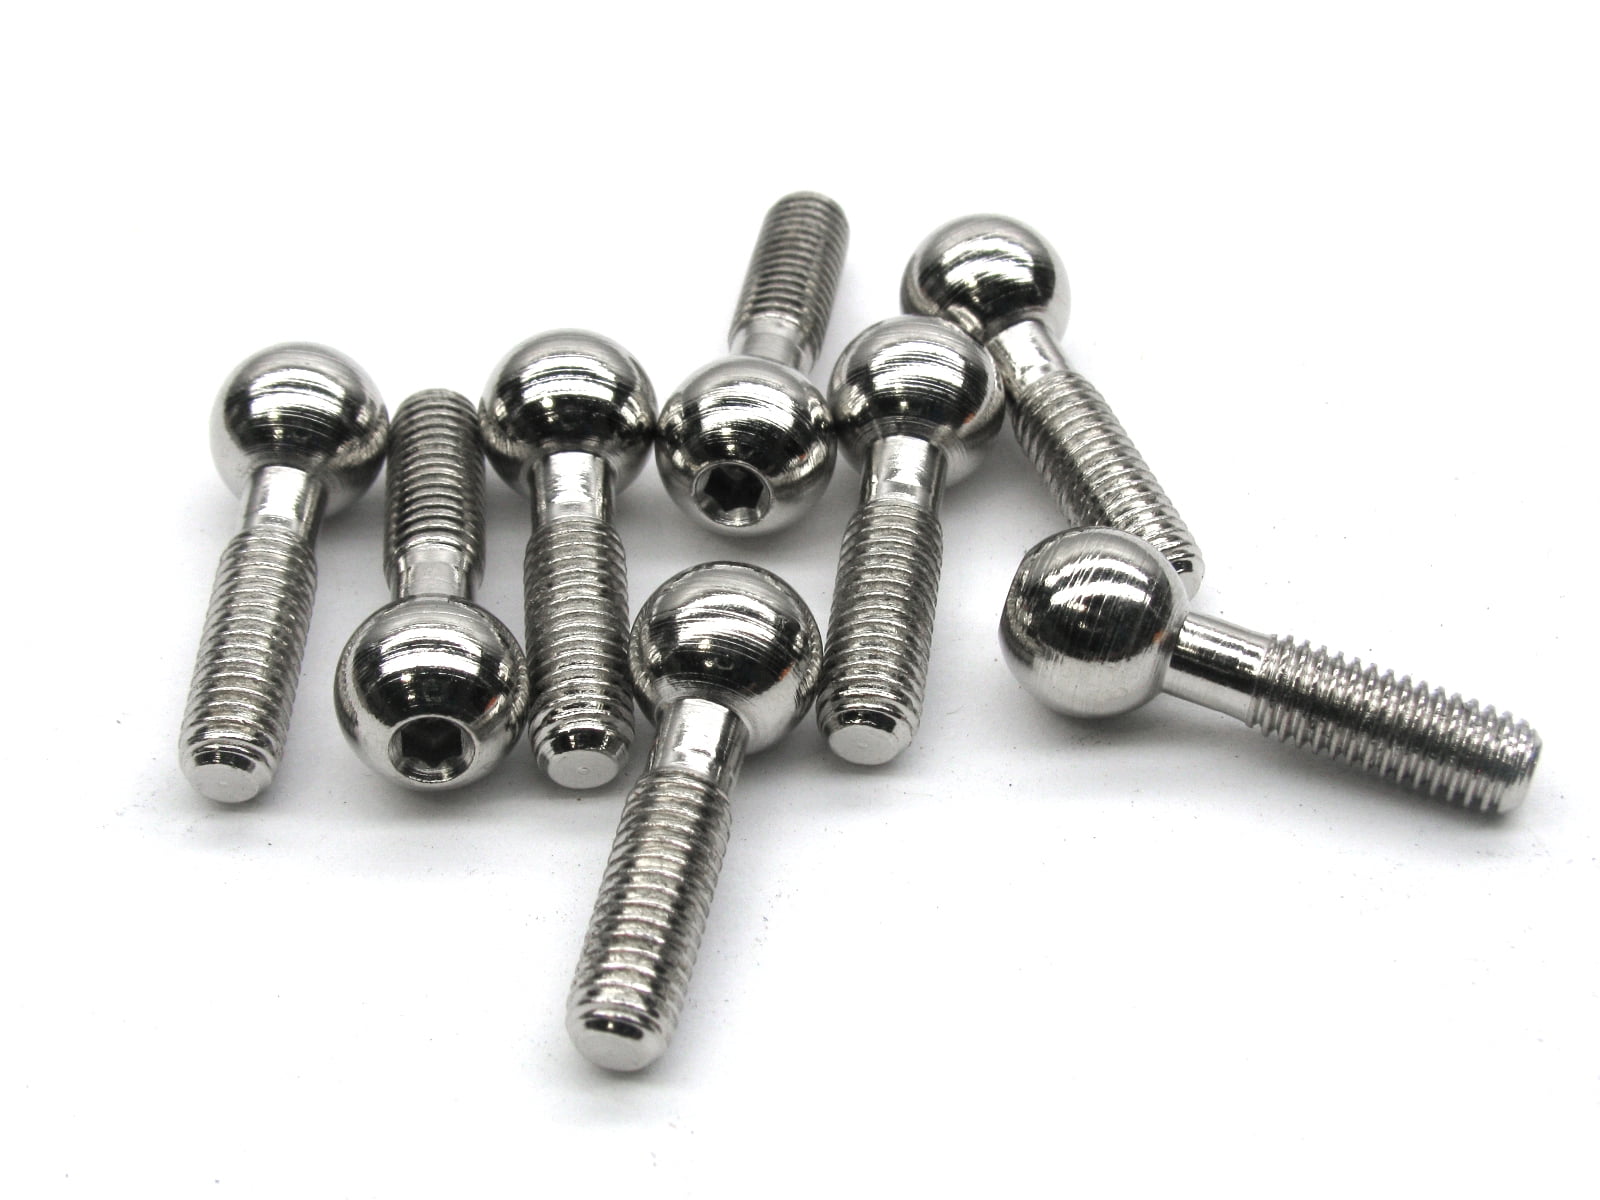 20 cone head non shedding gasket bicycle mounting screws Details about  / M5 16//18